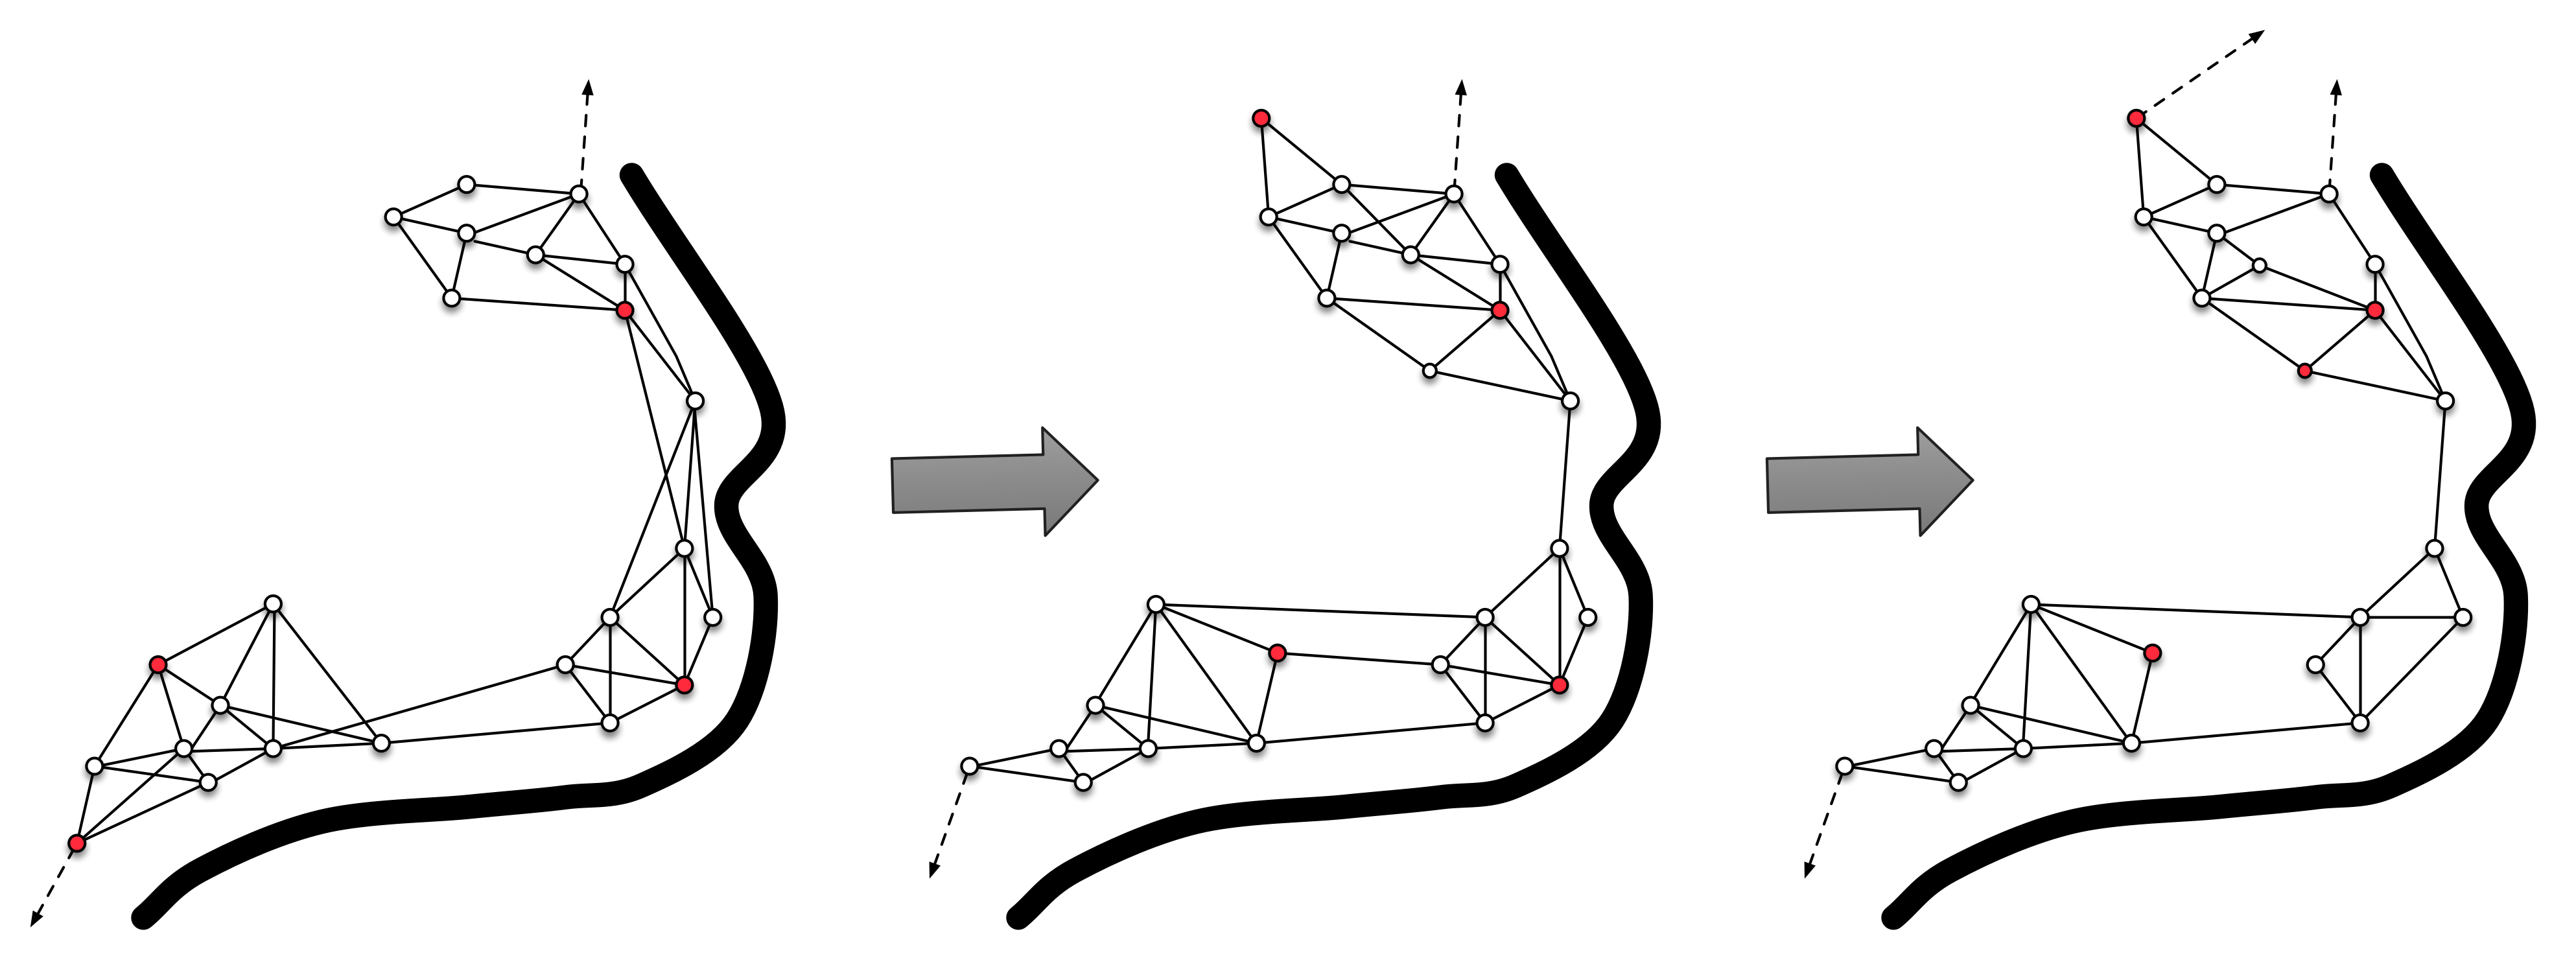 Figure 1: Network representation of a diachronic connectivity model.